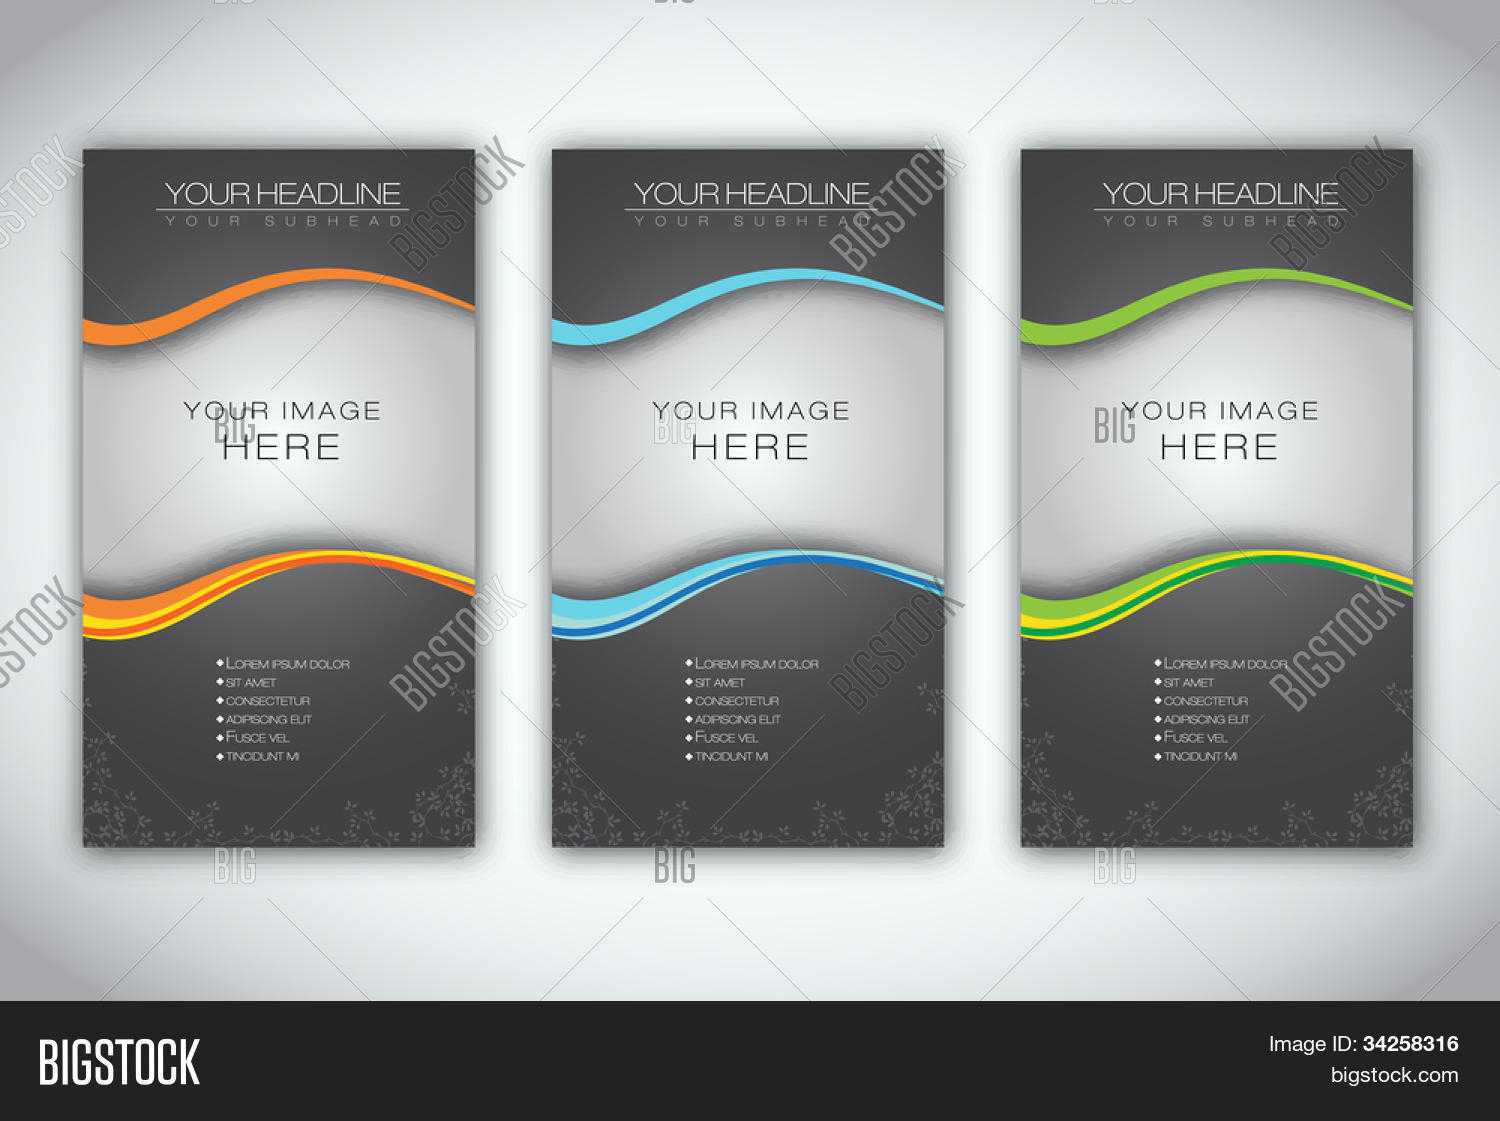 Set Blank Brochure Vector & Photo (Free Trial) | Bigstock Intended For Free Brochure Templates For Word 2010